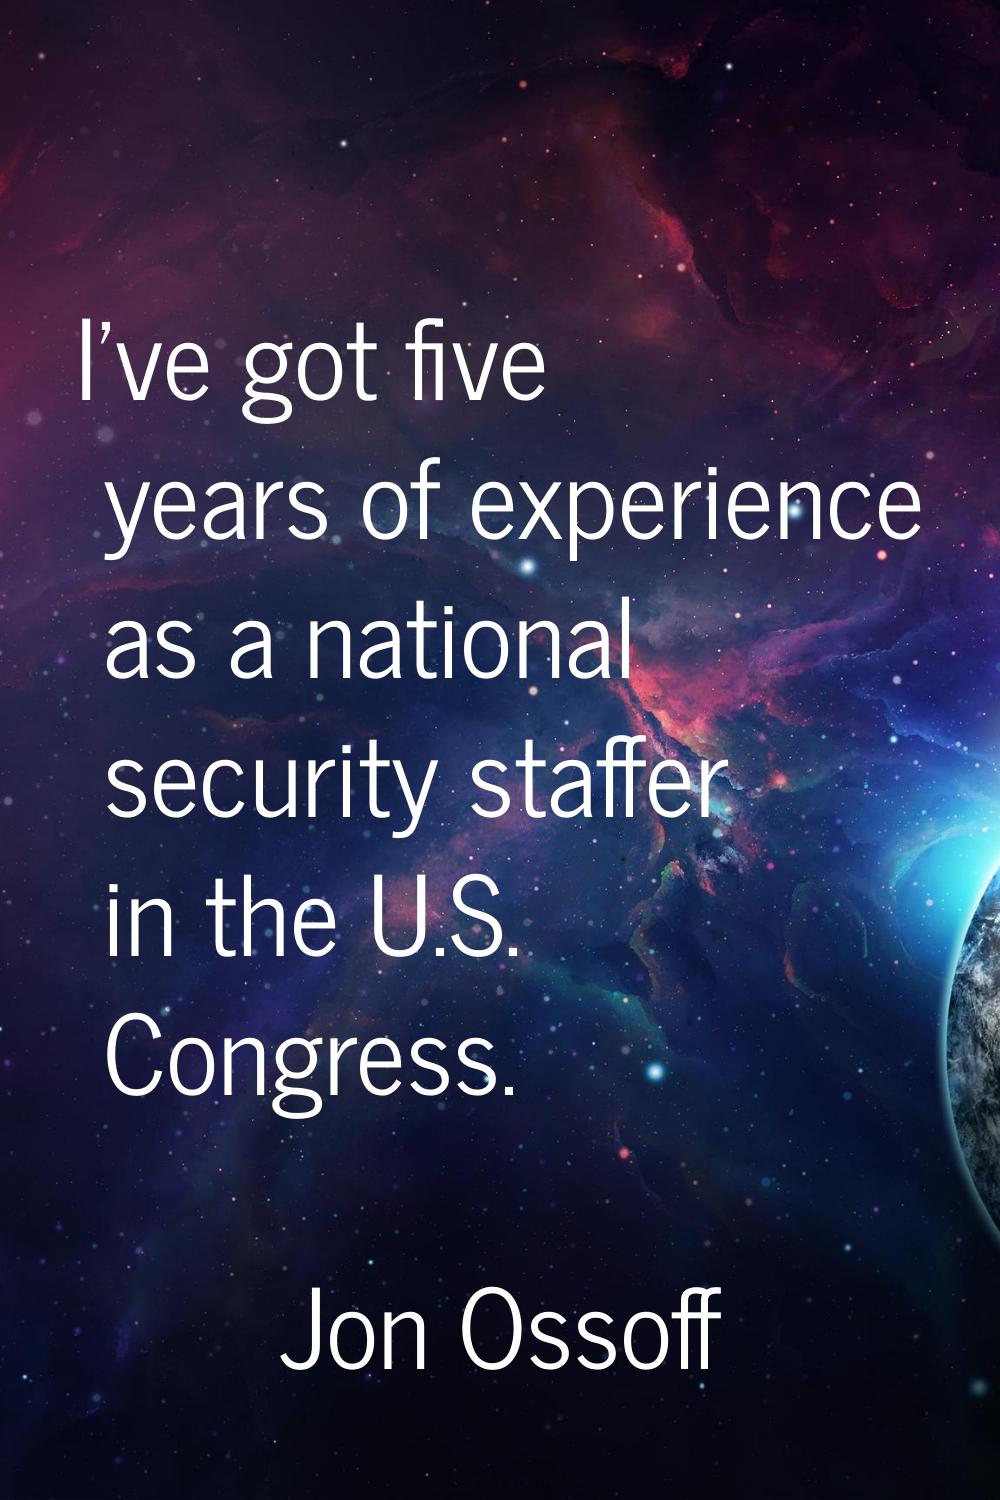 I've got five years of experience as a national security staffer in the U.S. Congress.